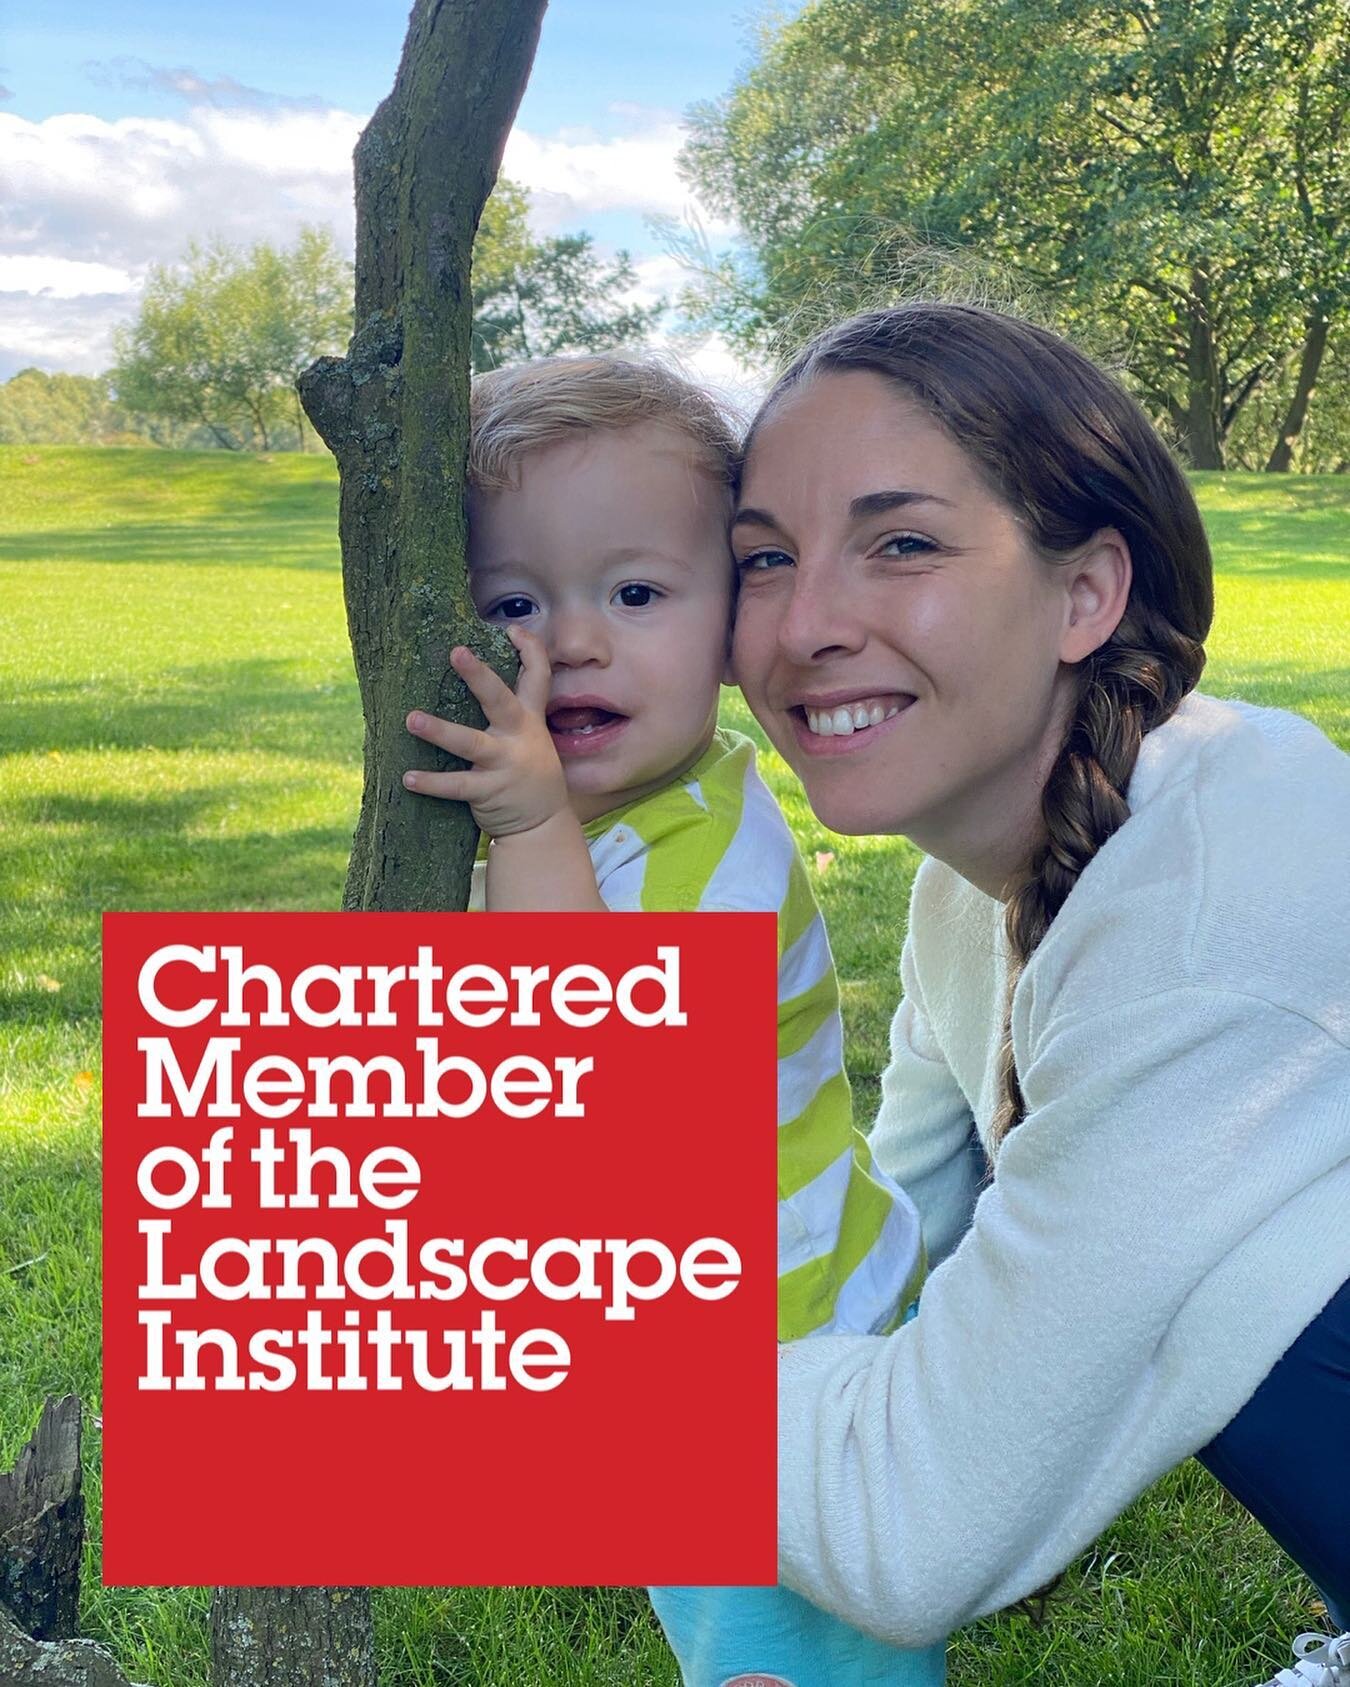 Excited to announce I am finally a Chartered Landscape Architect. 

Thank you to the @landscapeinstitute for their forward thinking approach in creating the new Experience to Chartership route (E2C). 

The traditional pathway is excellent for graduat